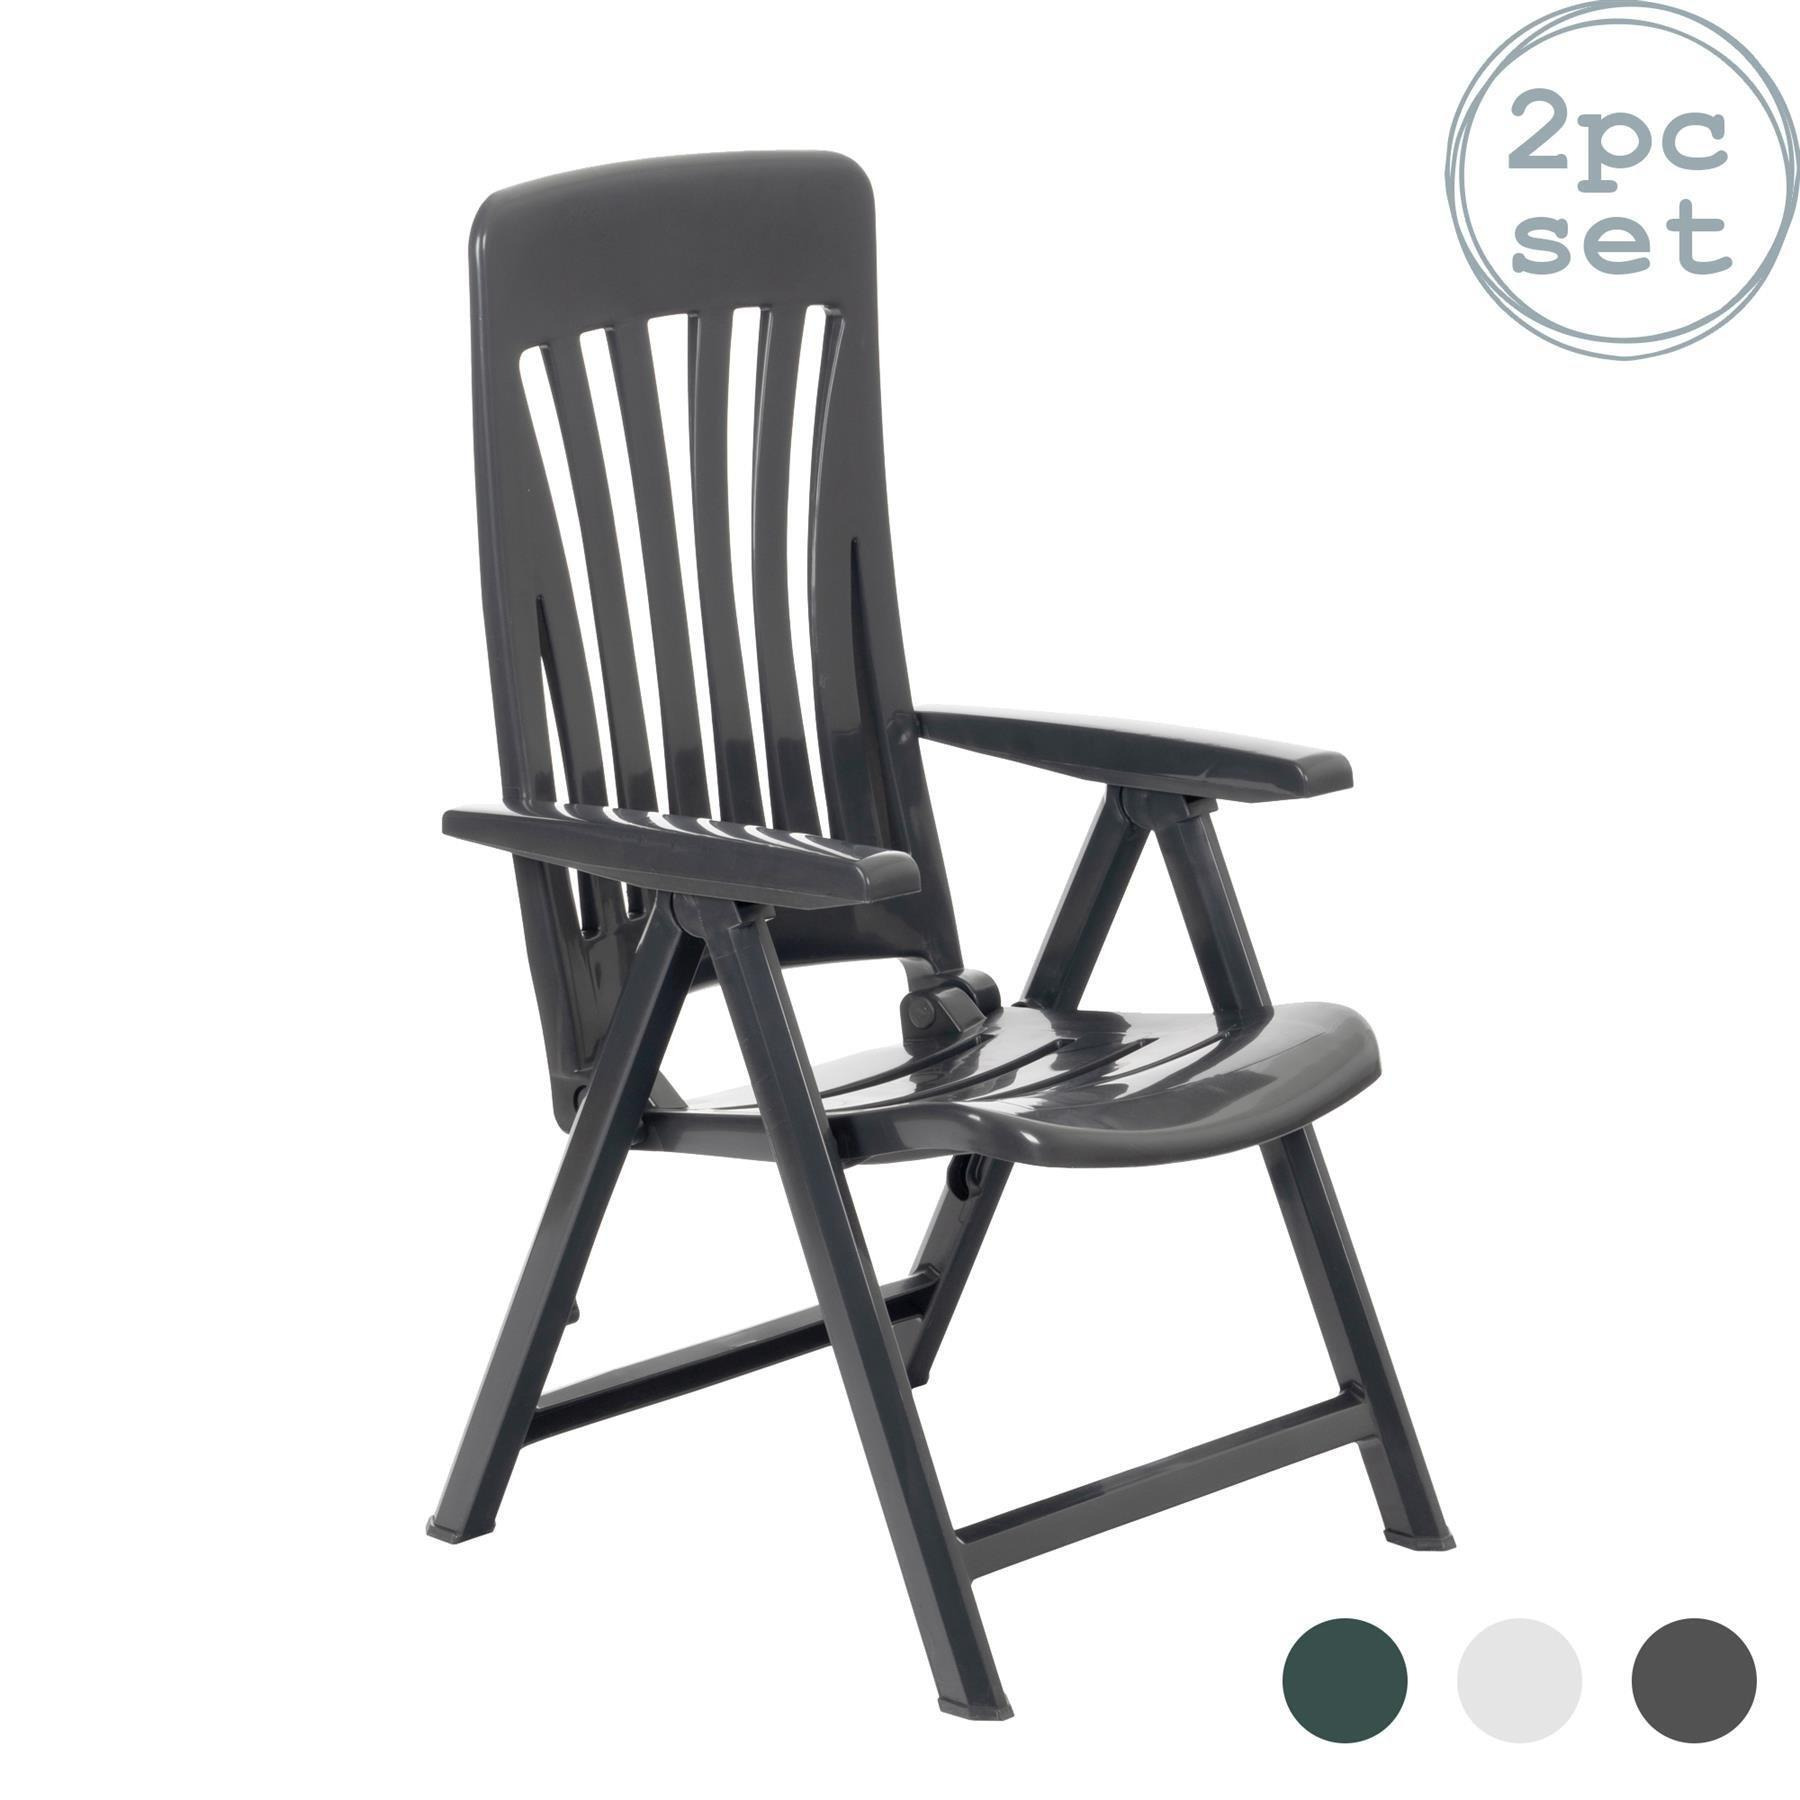 Blanes Reclining Garden Chairs Pack of 2 - image 1